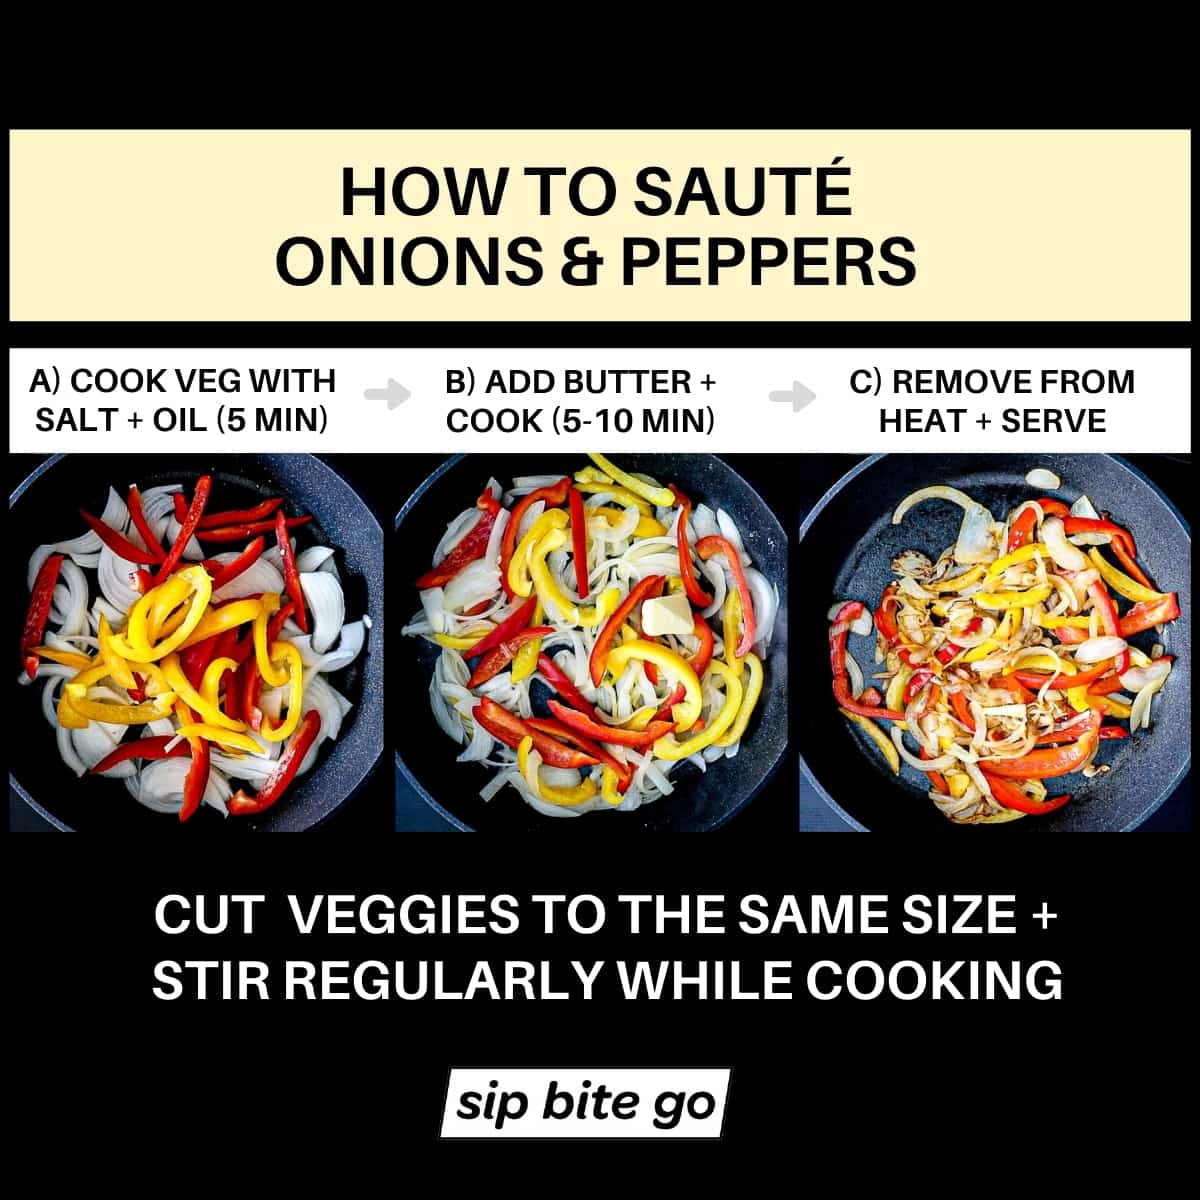 Infographic collage of images with captions demonstrating how to cook onions and peppers on the stove with the saute method in a pan with olive oil and butter.